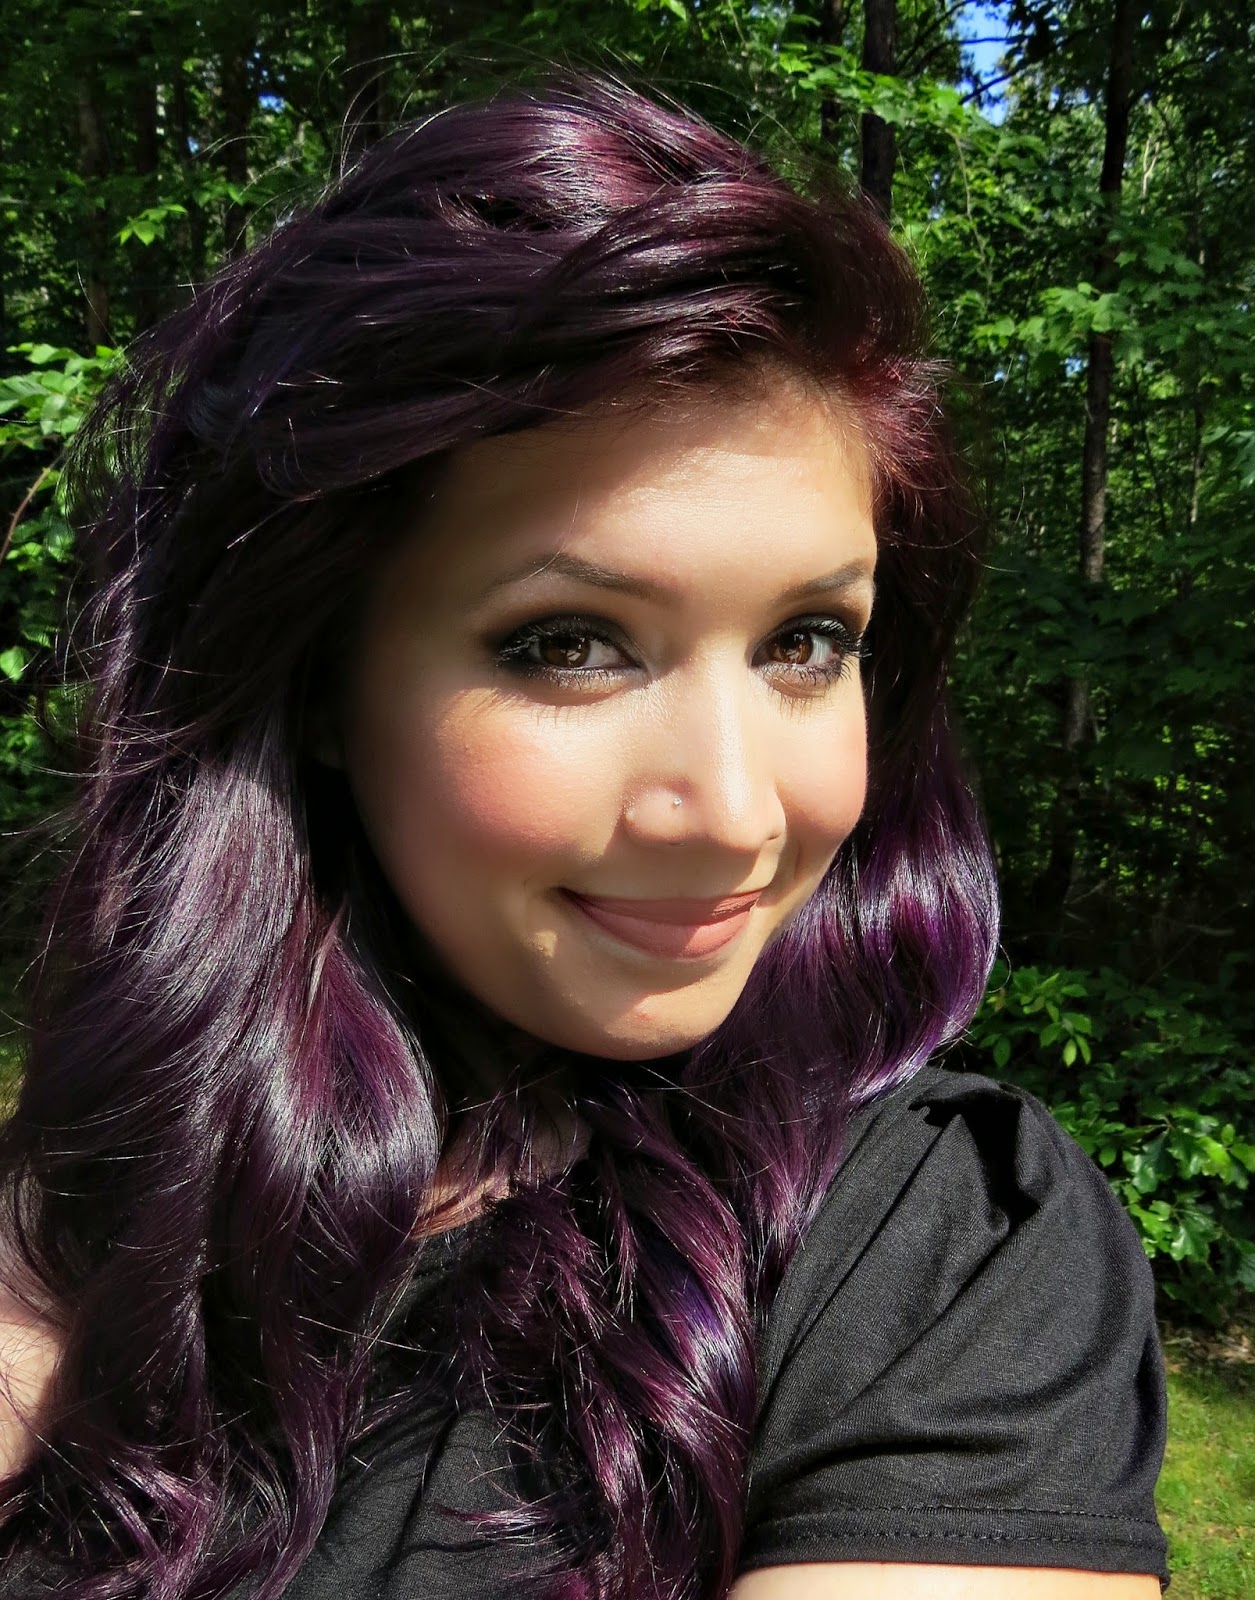 The Eagals Nest: How To Dye Your Hair Purple